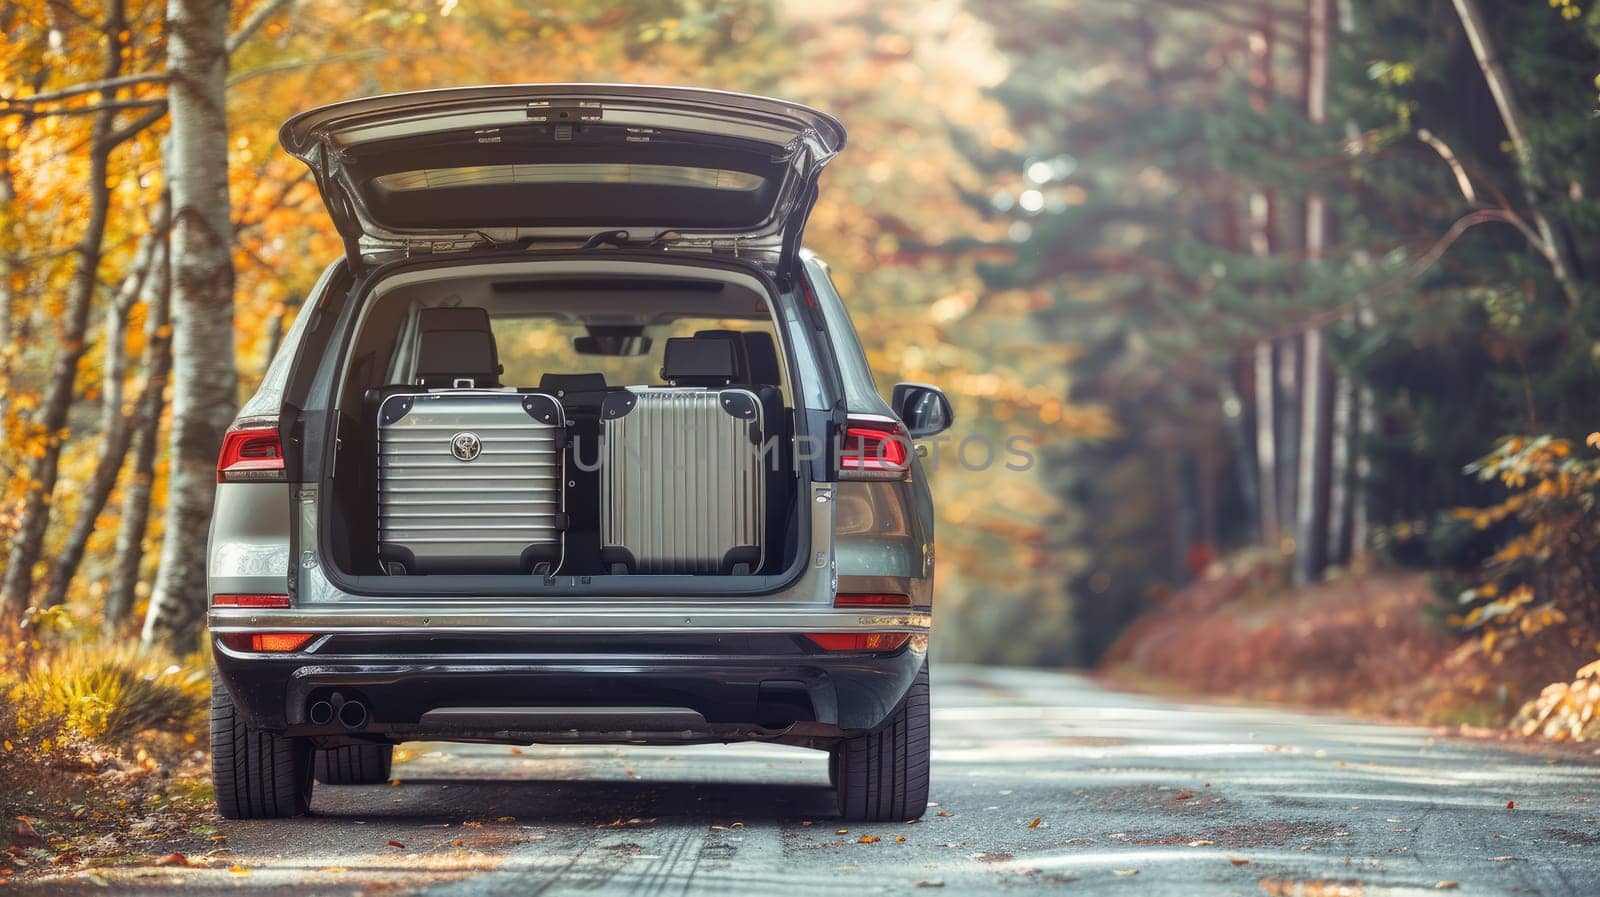 Family road trip, A suv car opens its trunk with luggage, Ready for road trip.